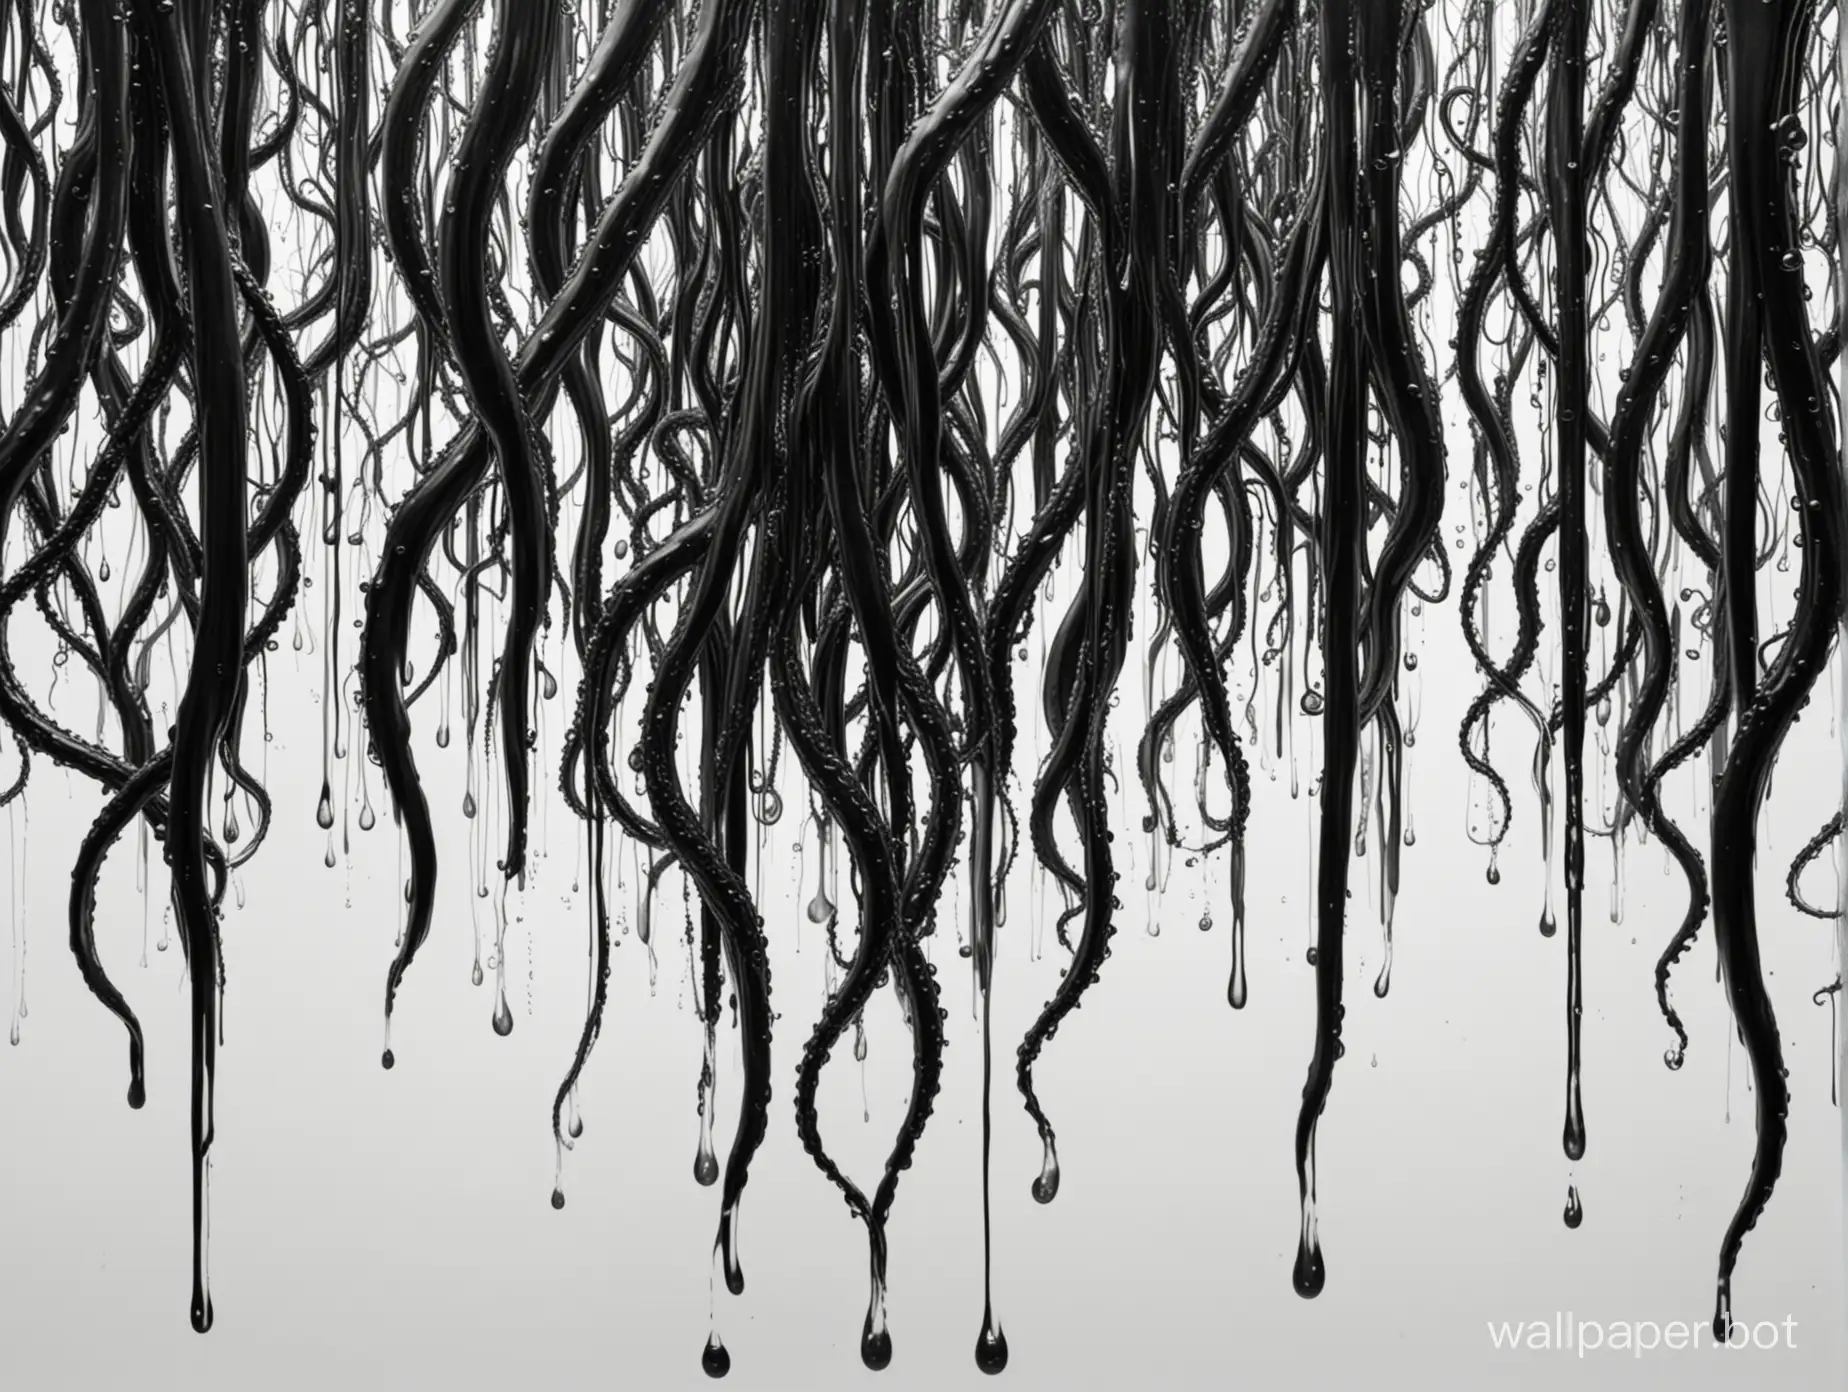 Abstract-Black-Tentacles-Dripping-in-Profound-Chaos-on-White-Background